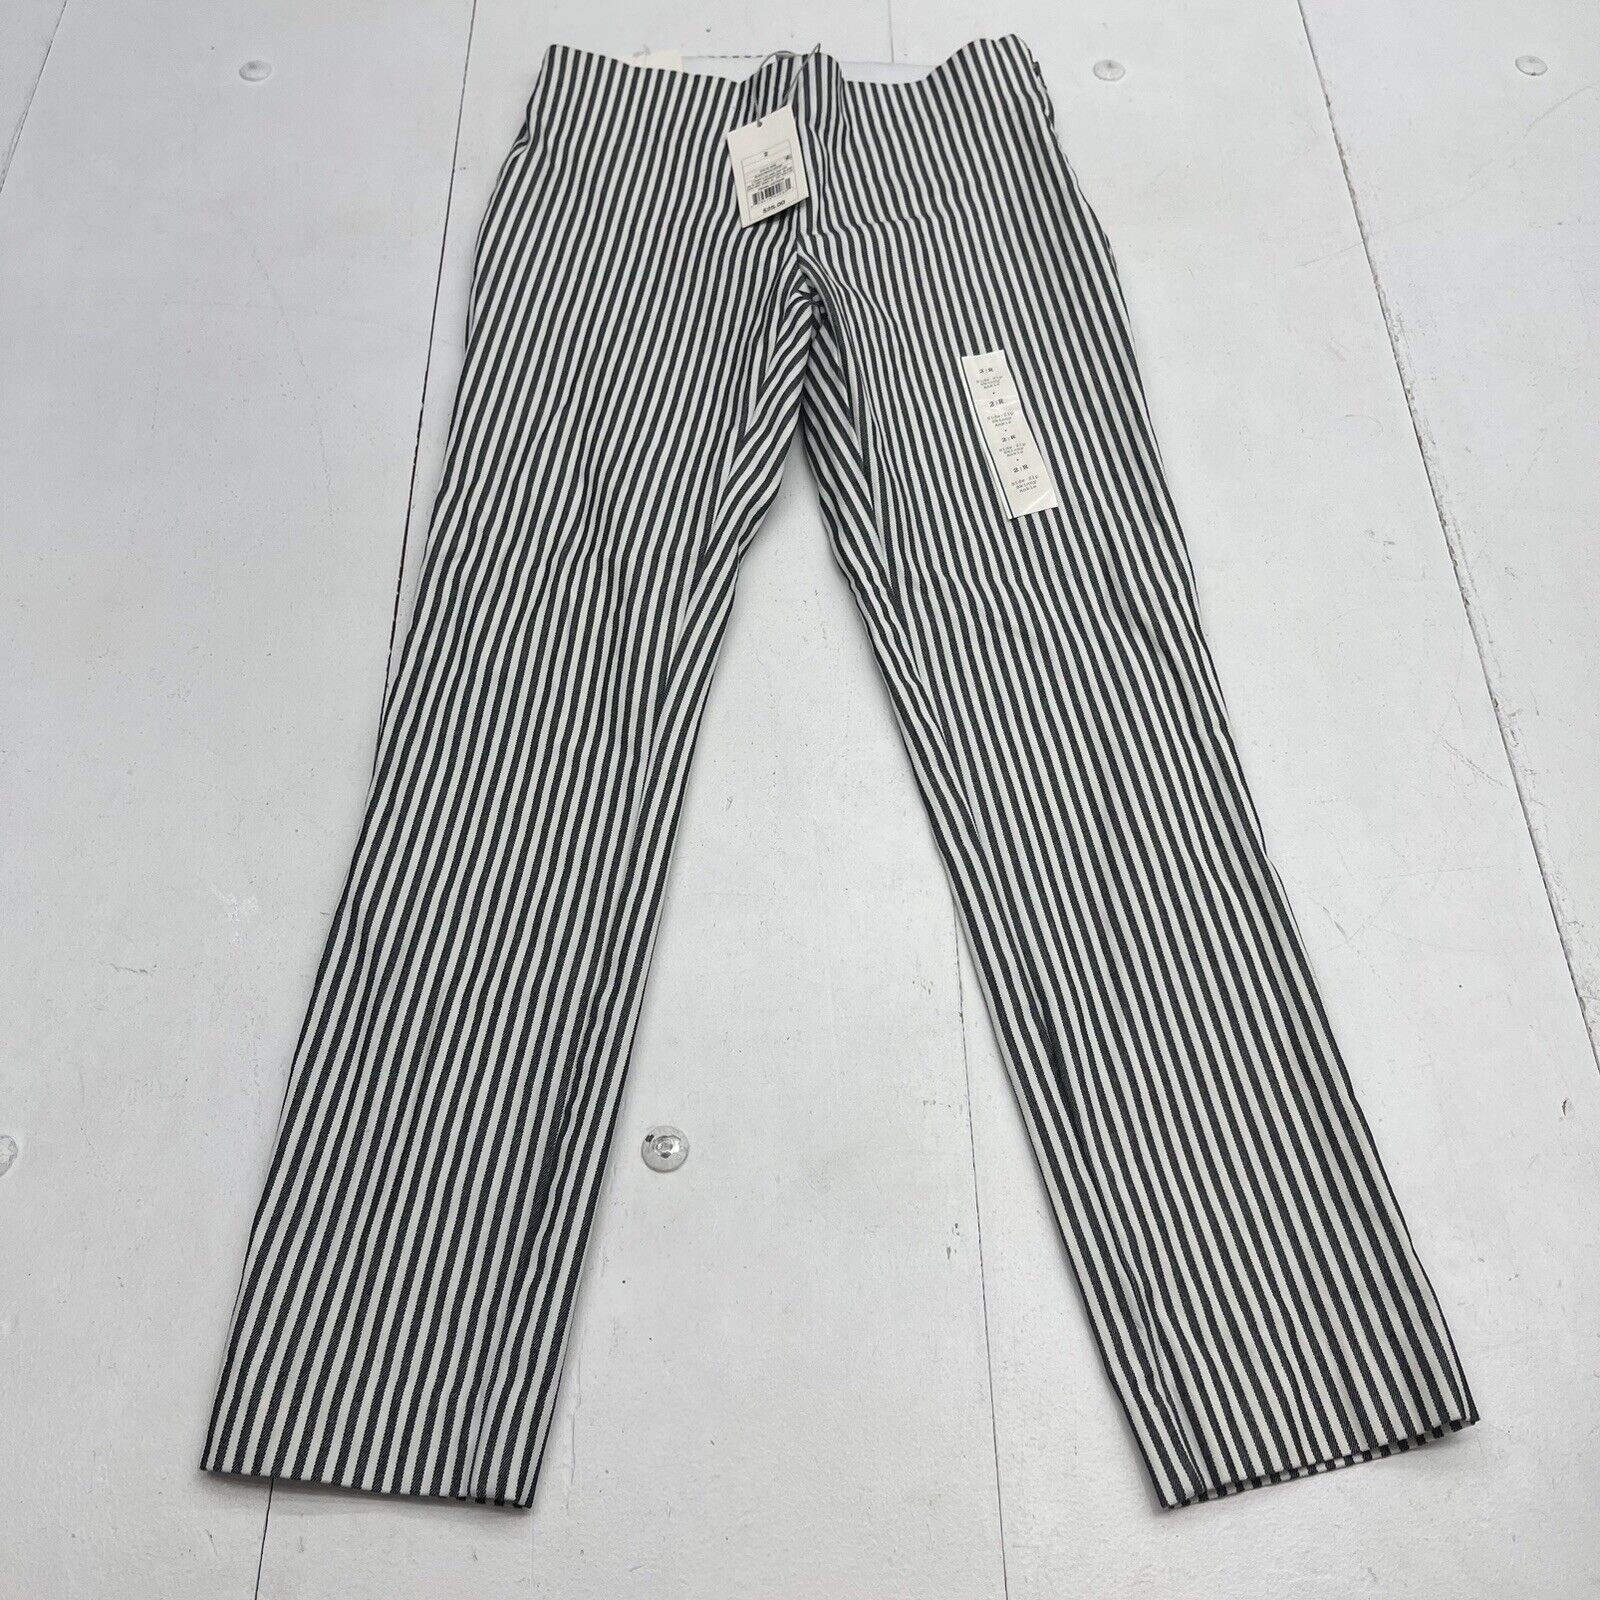 A New Day Black White Stripe Skinny Ankle Pants Women's Size 2 New Def -  beyond exchange